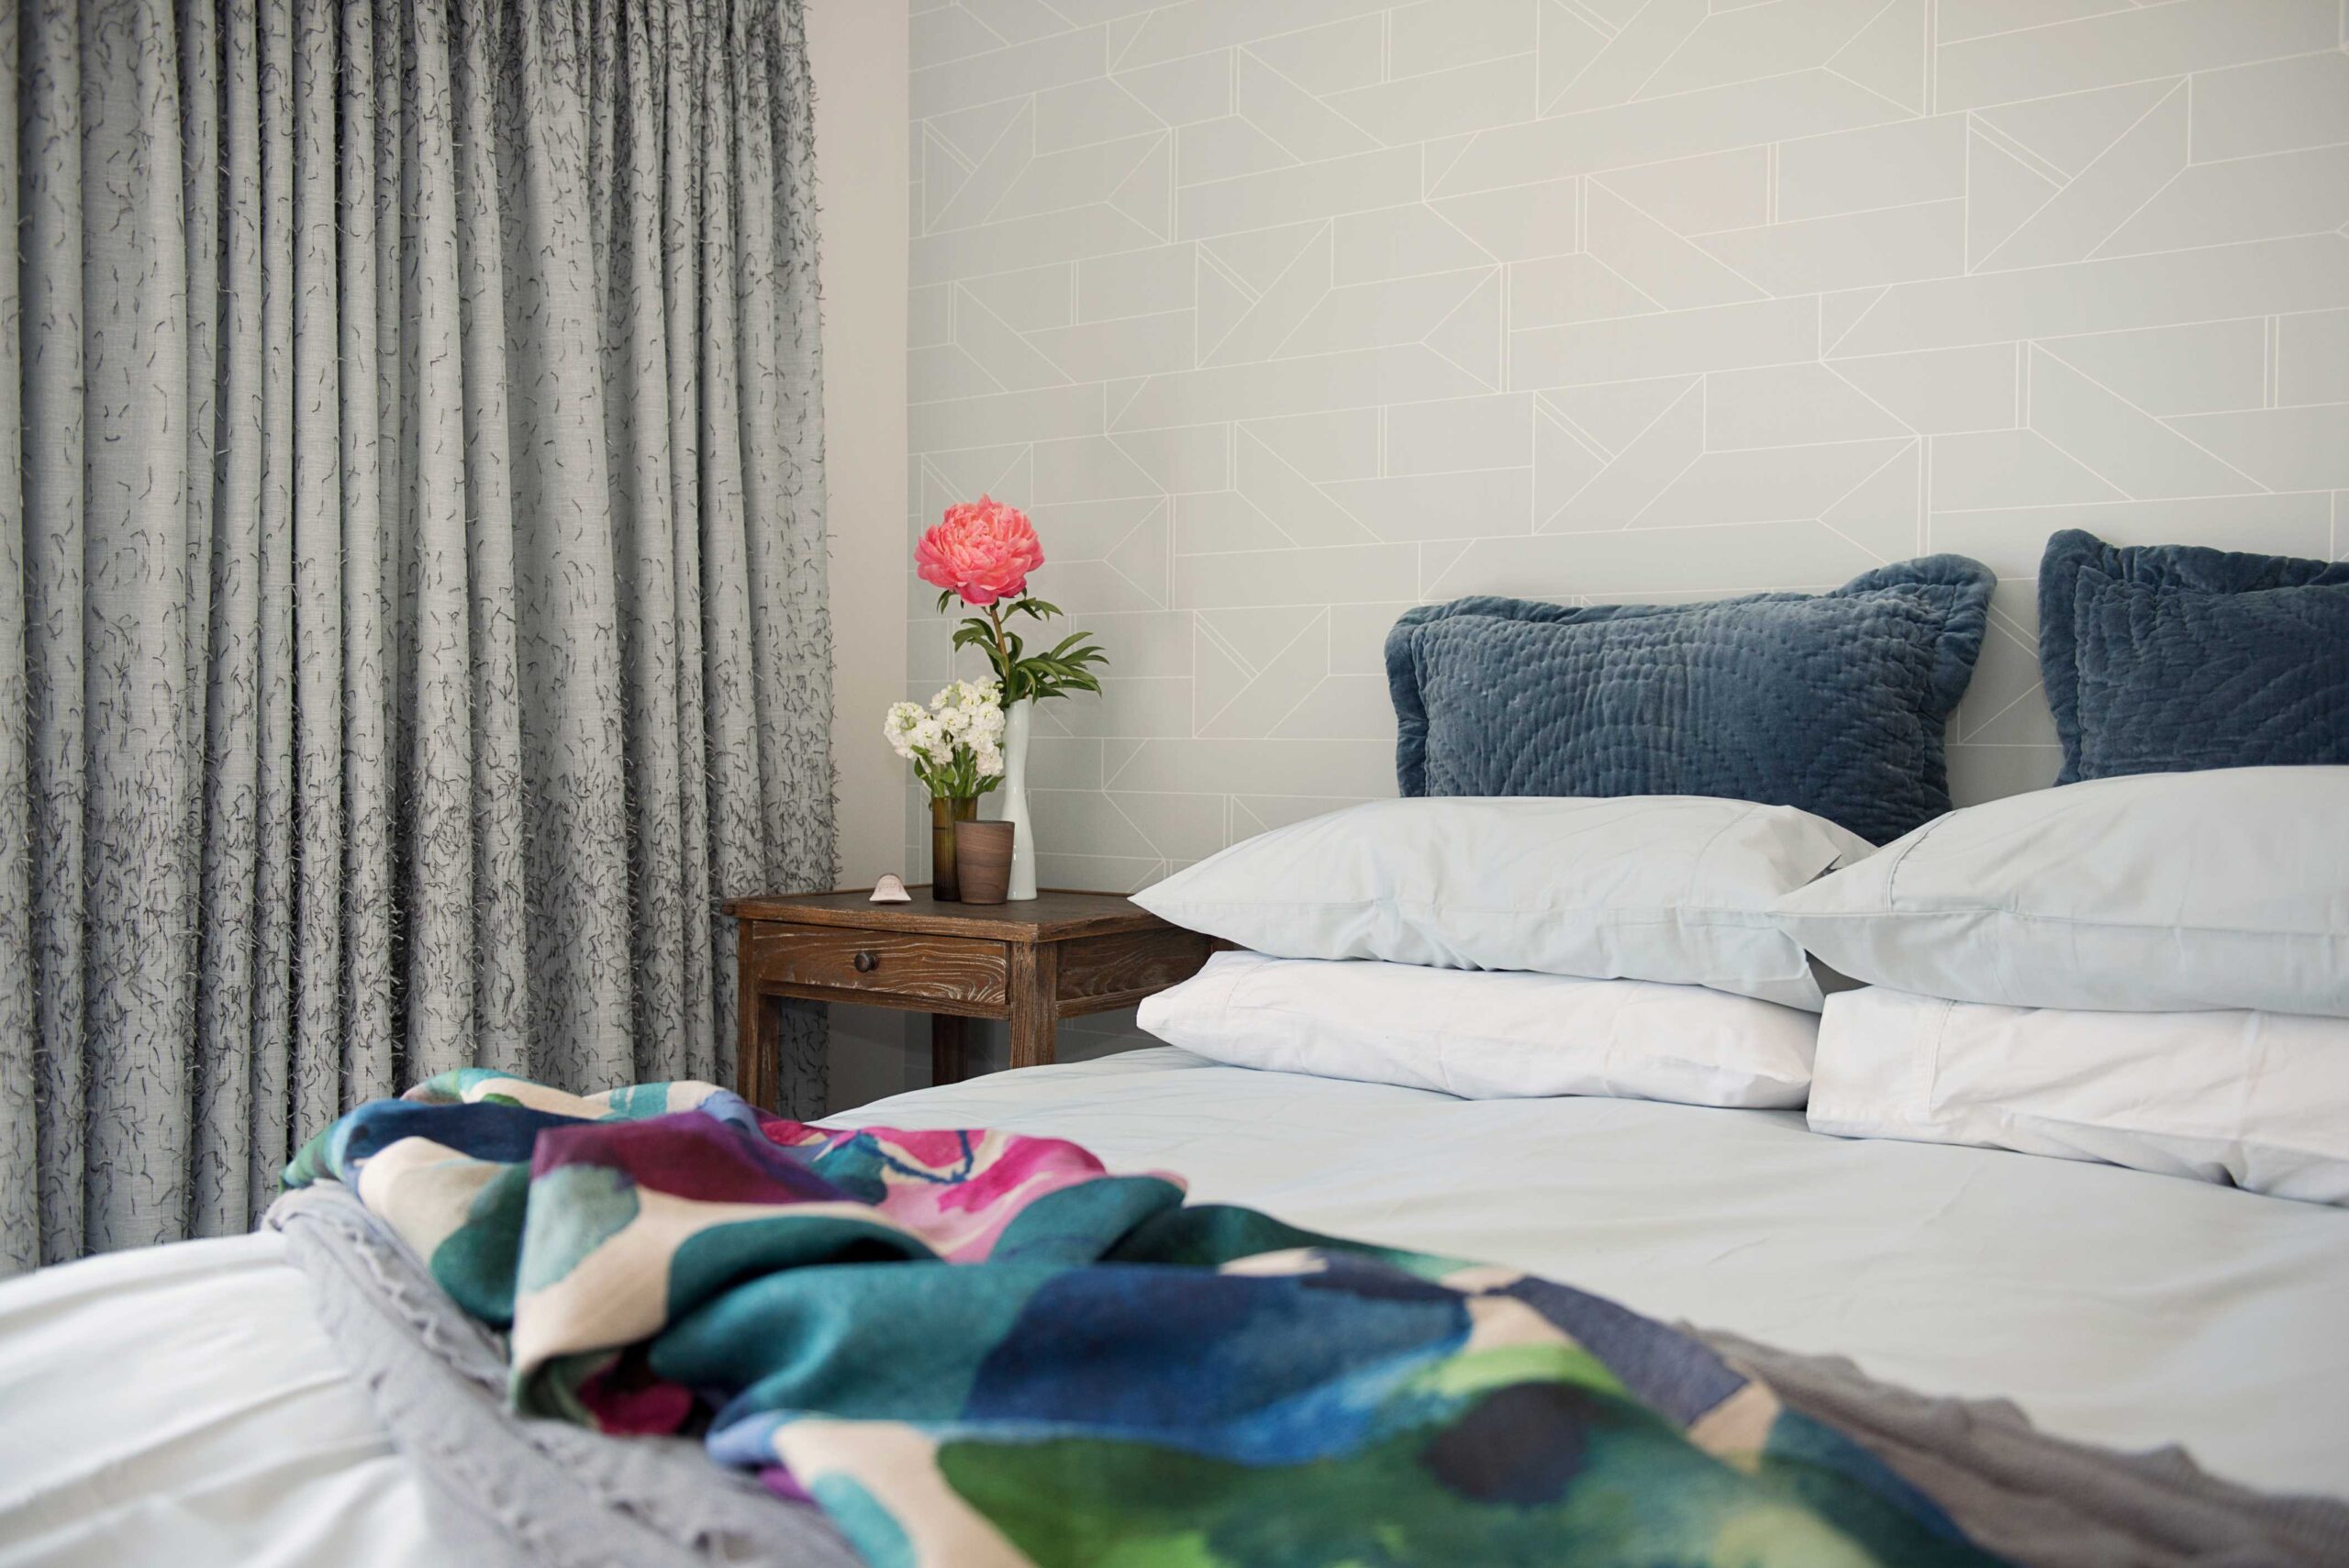  Main bedroom with colourful throws and feature wallpaper.